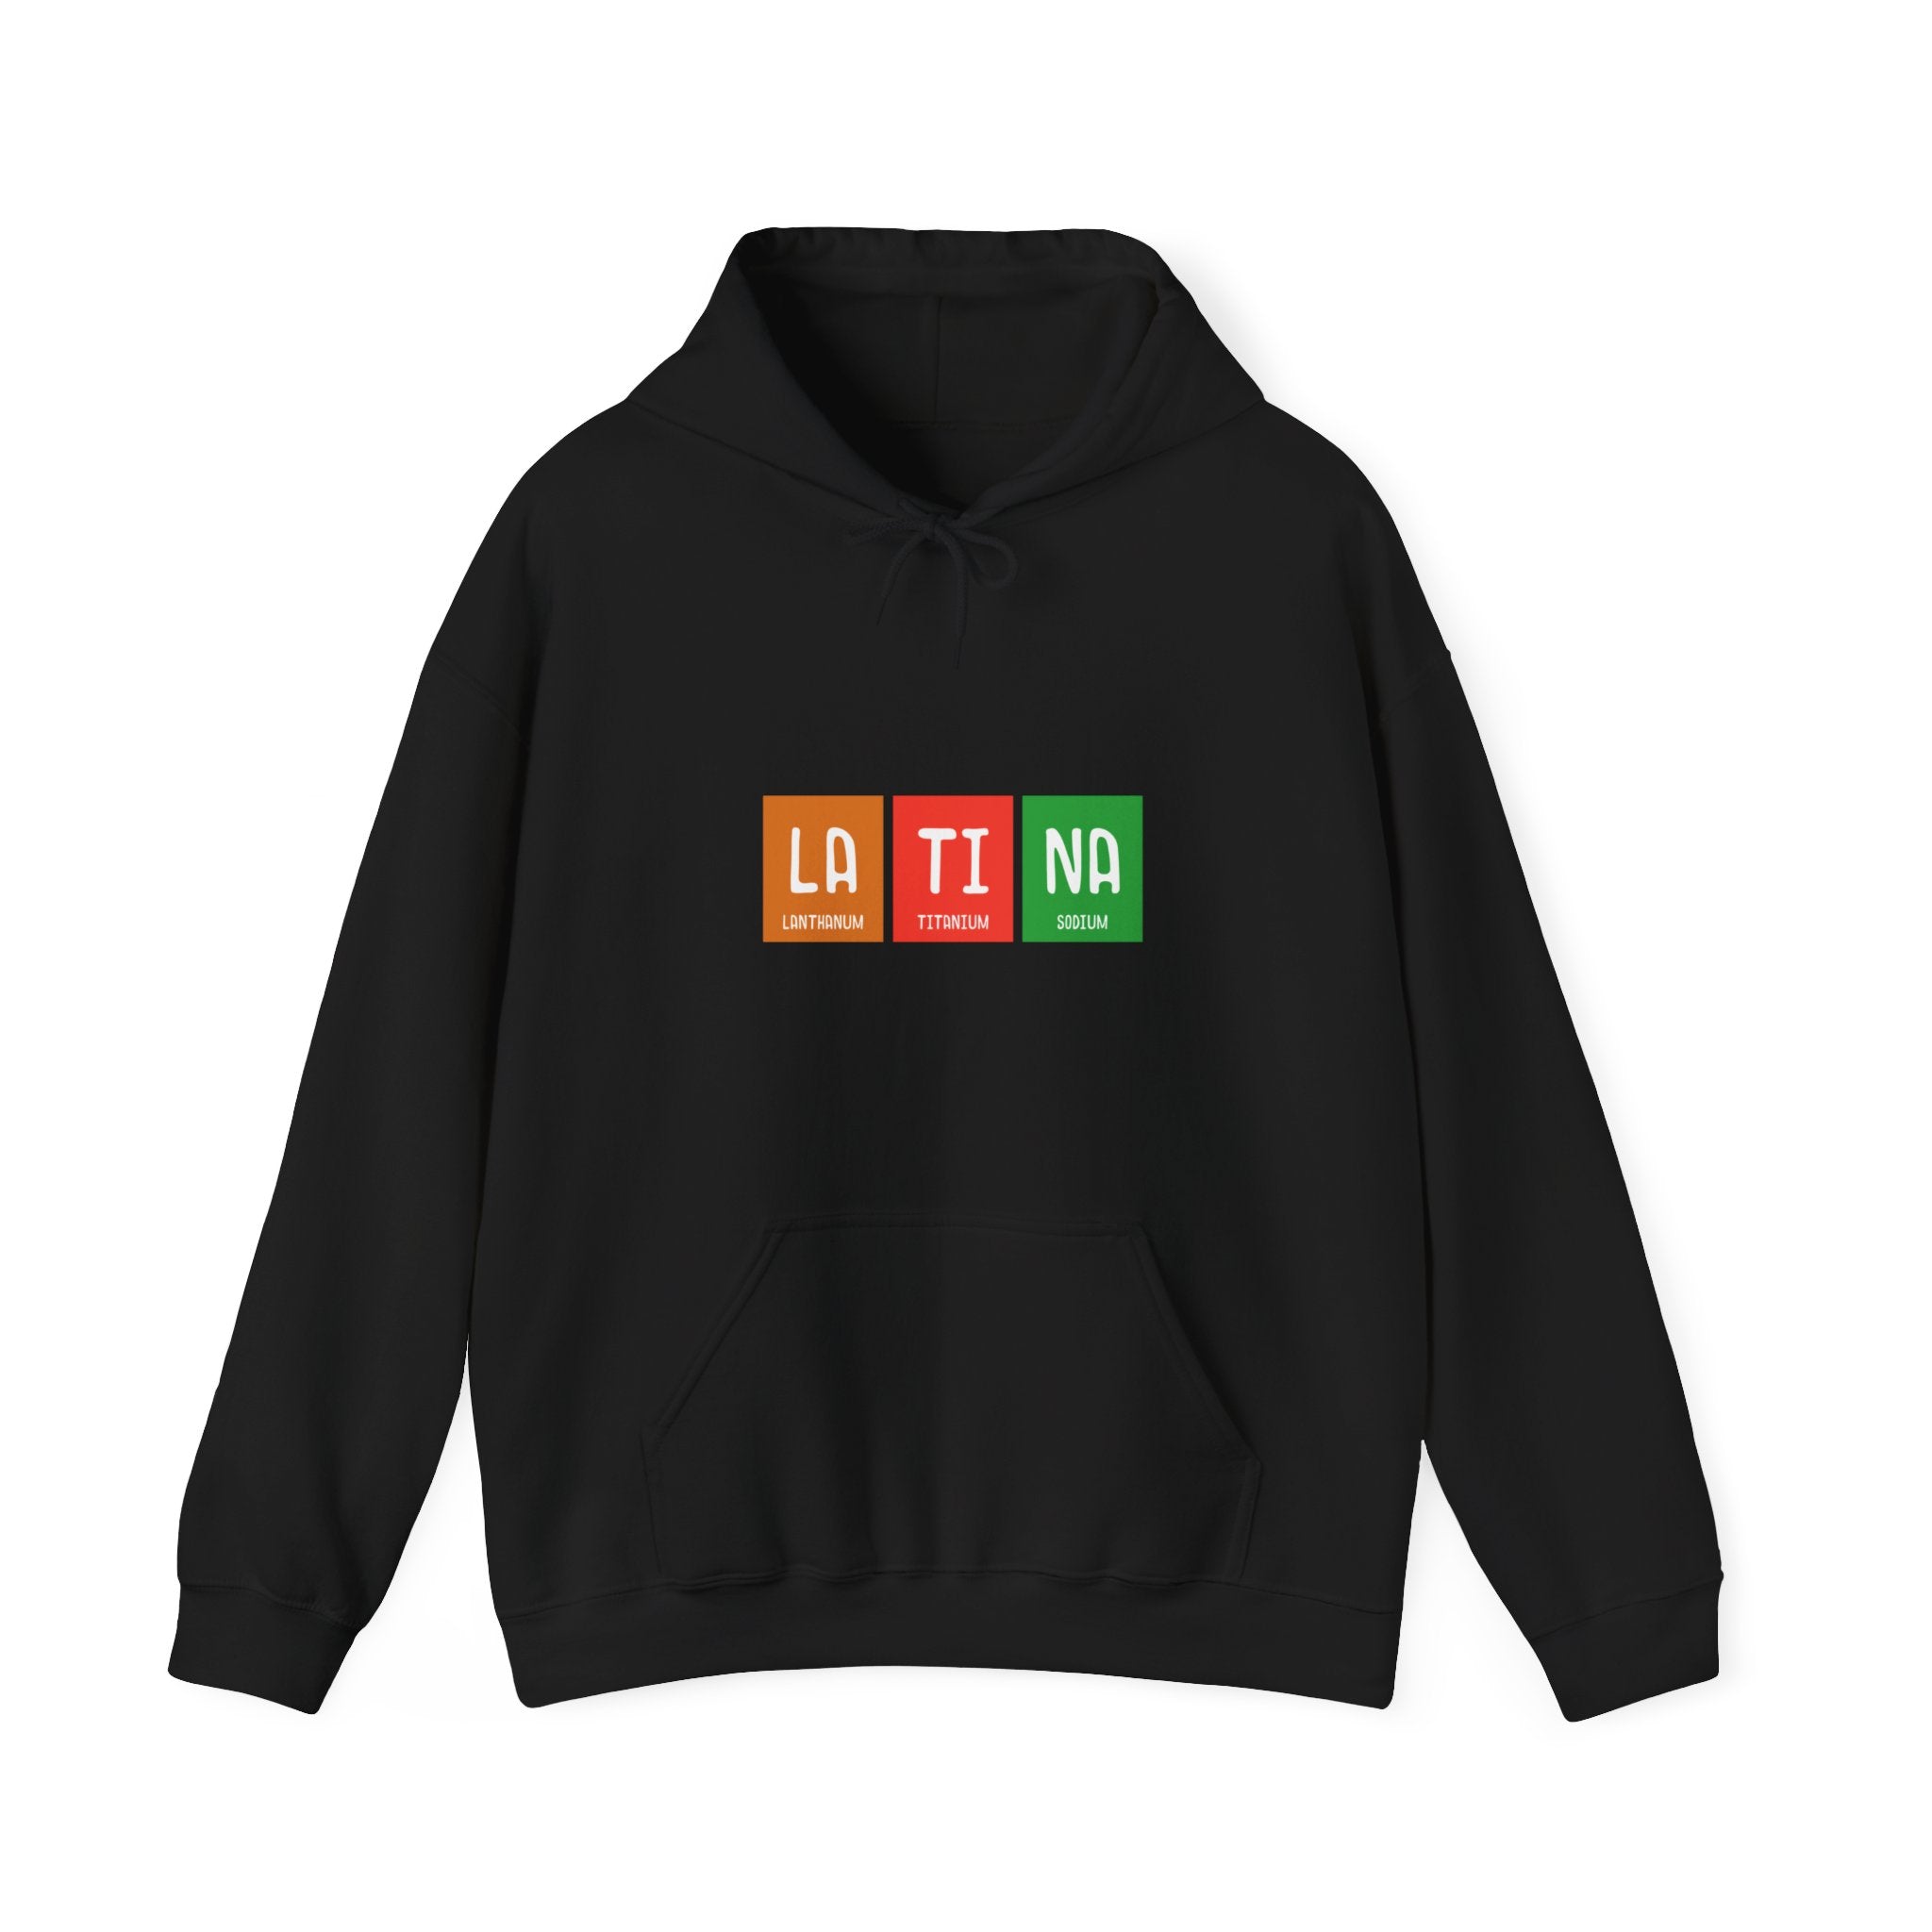 A black hooded sweatshirt with the LA-TI-NA - Hooded Sweatshirt design on the front in bold white letters over orange, red, and green squares. Each square also contains smaller white text below. Made from 100% cotton for ultimate comfort.